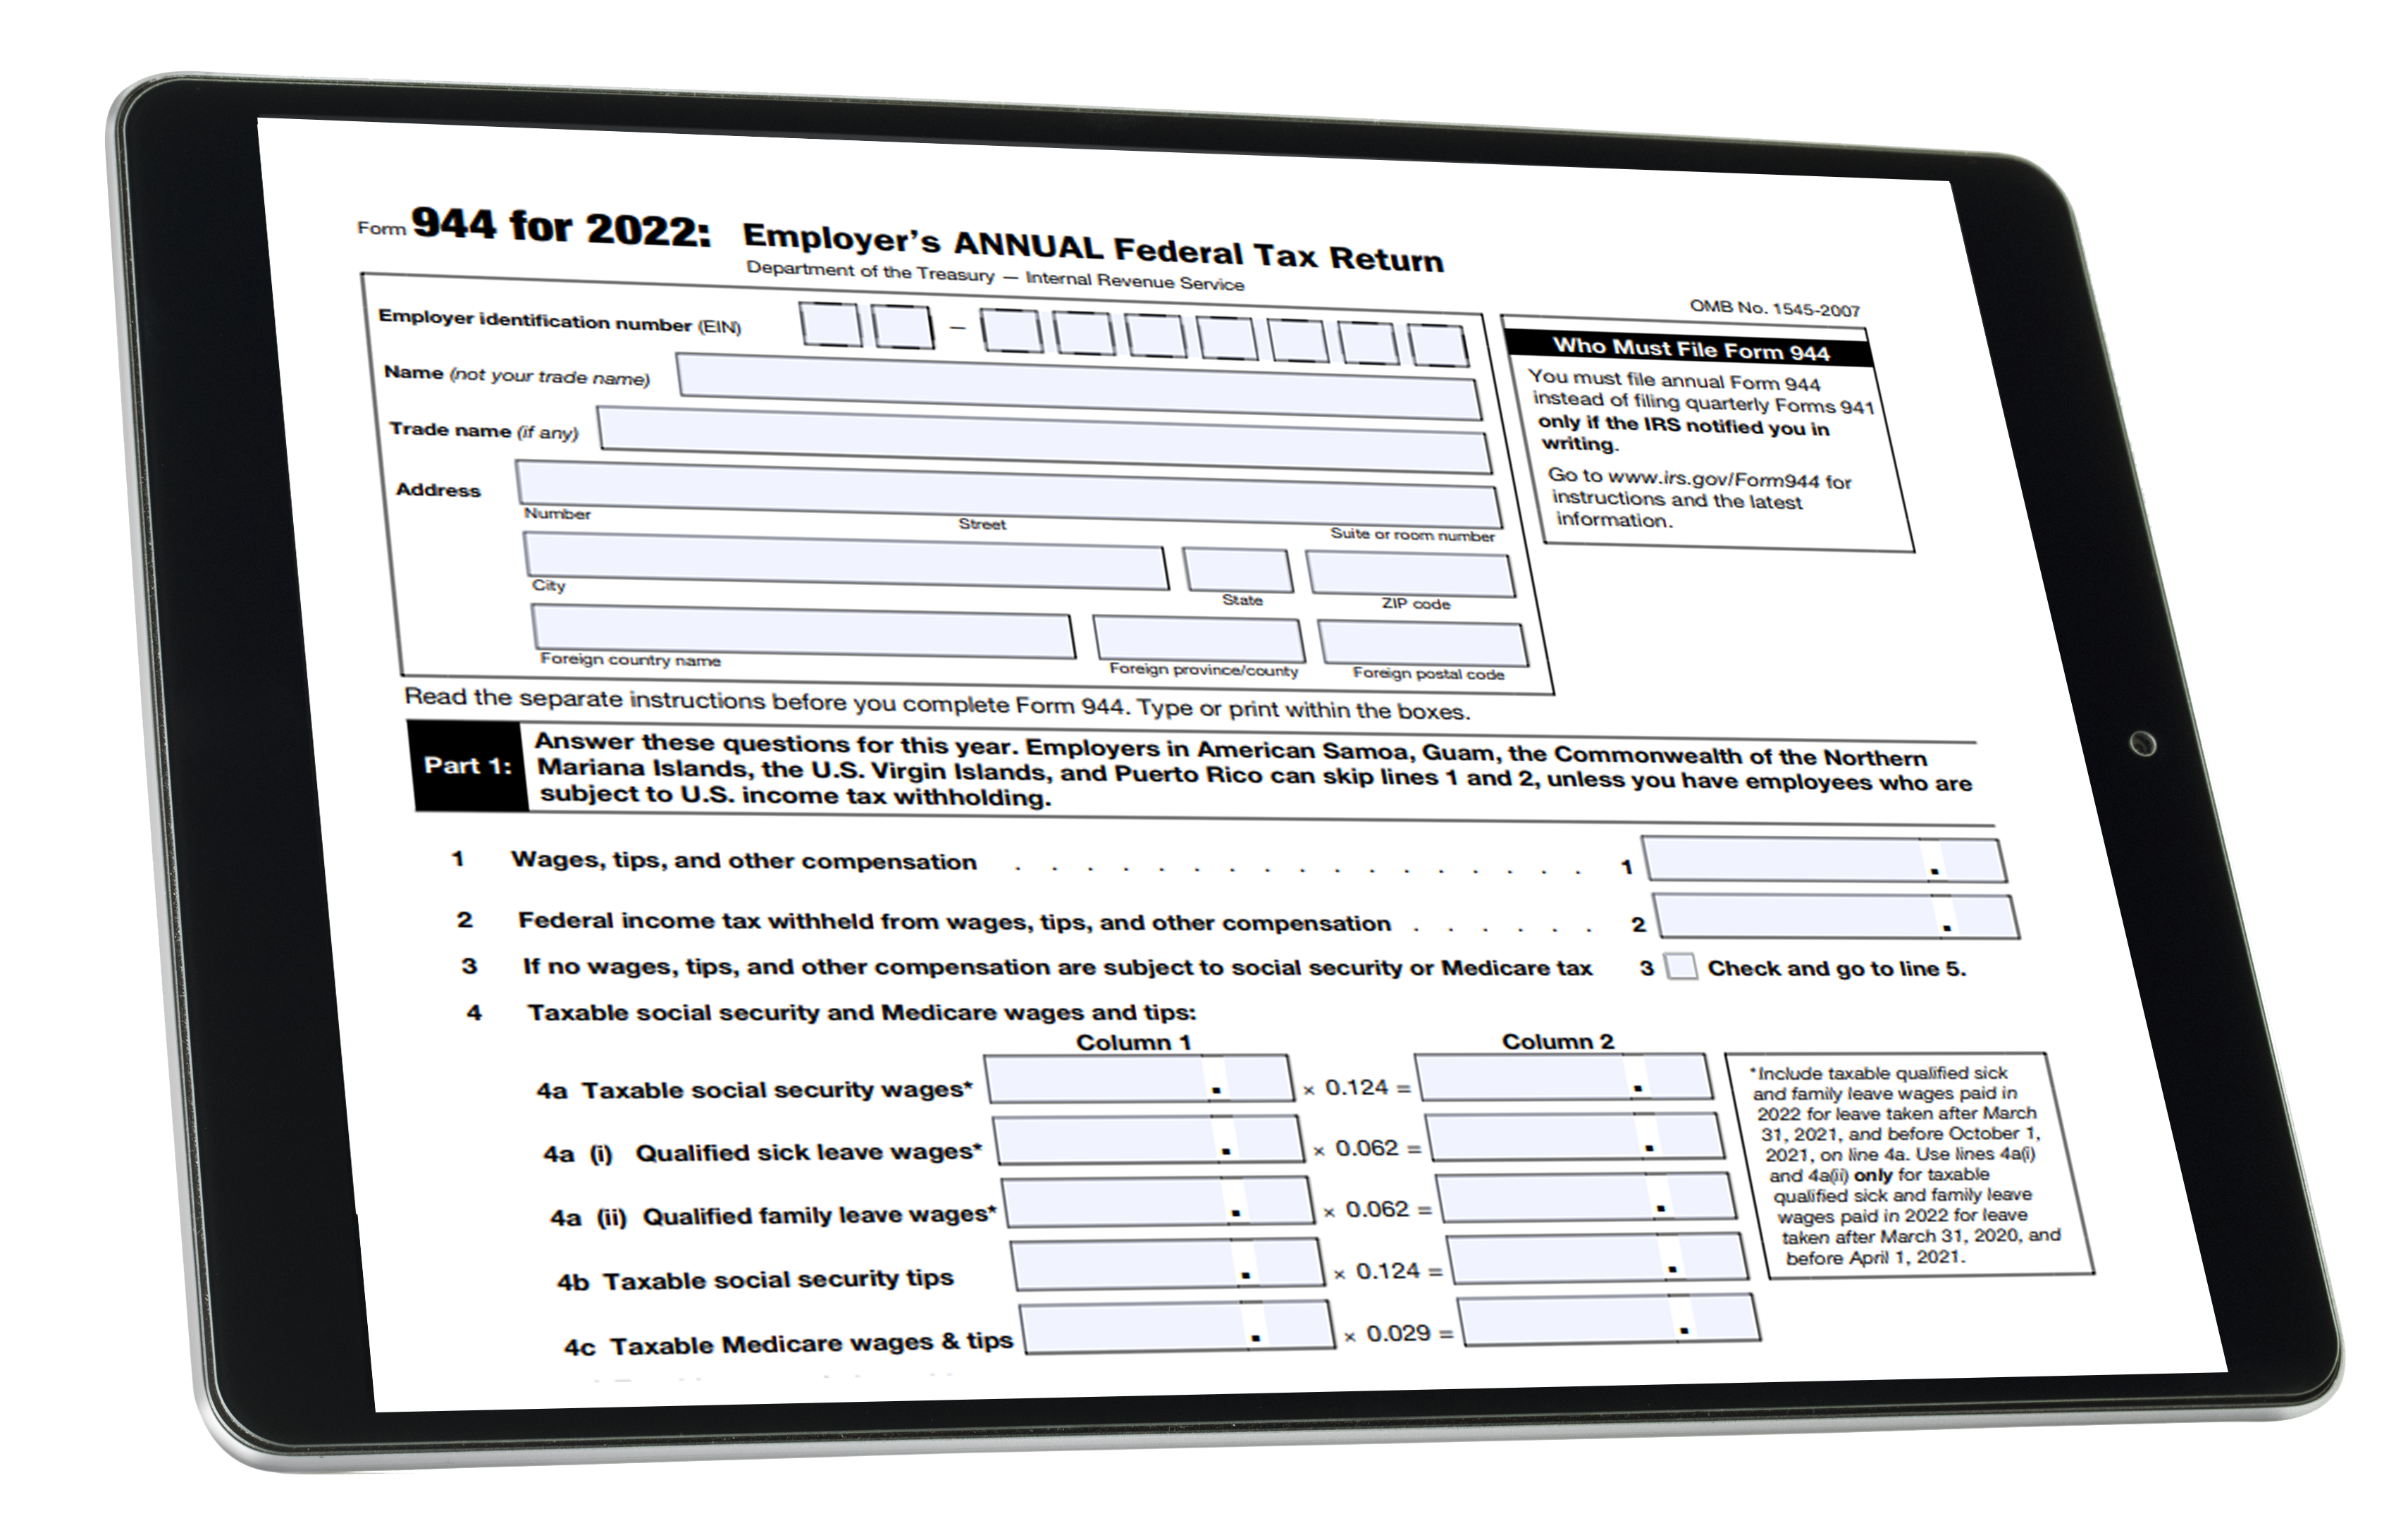 IRS Form 944 for 2022